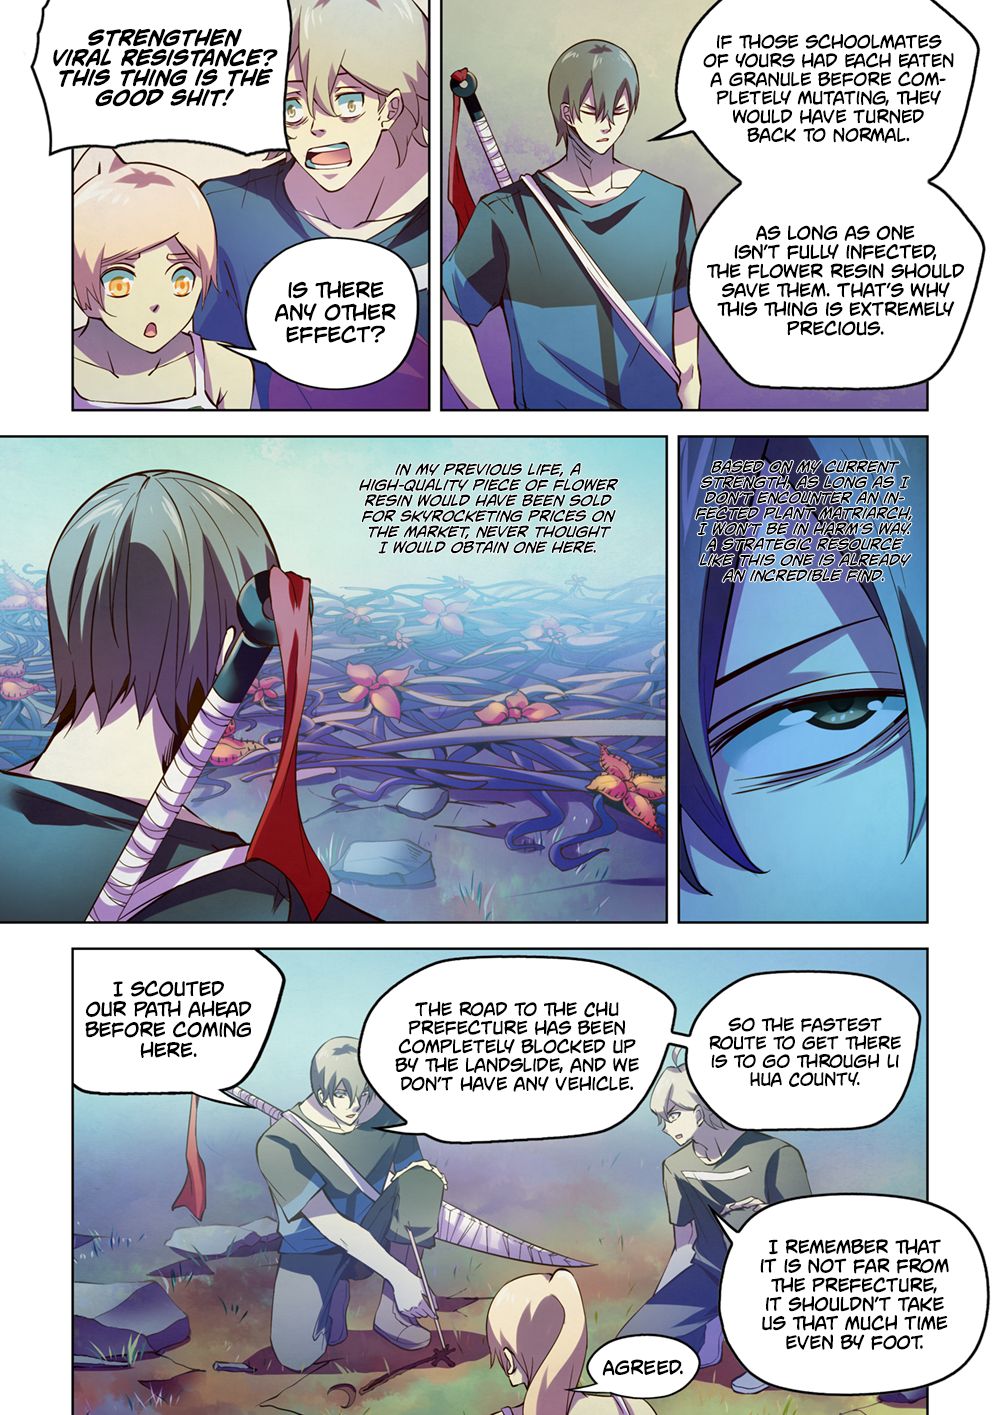 The Last Human Chapter 196 Page 9